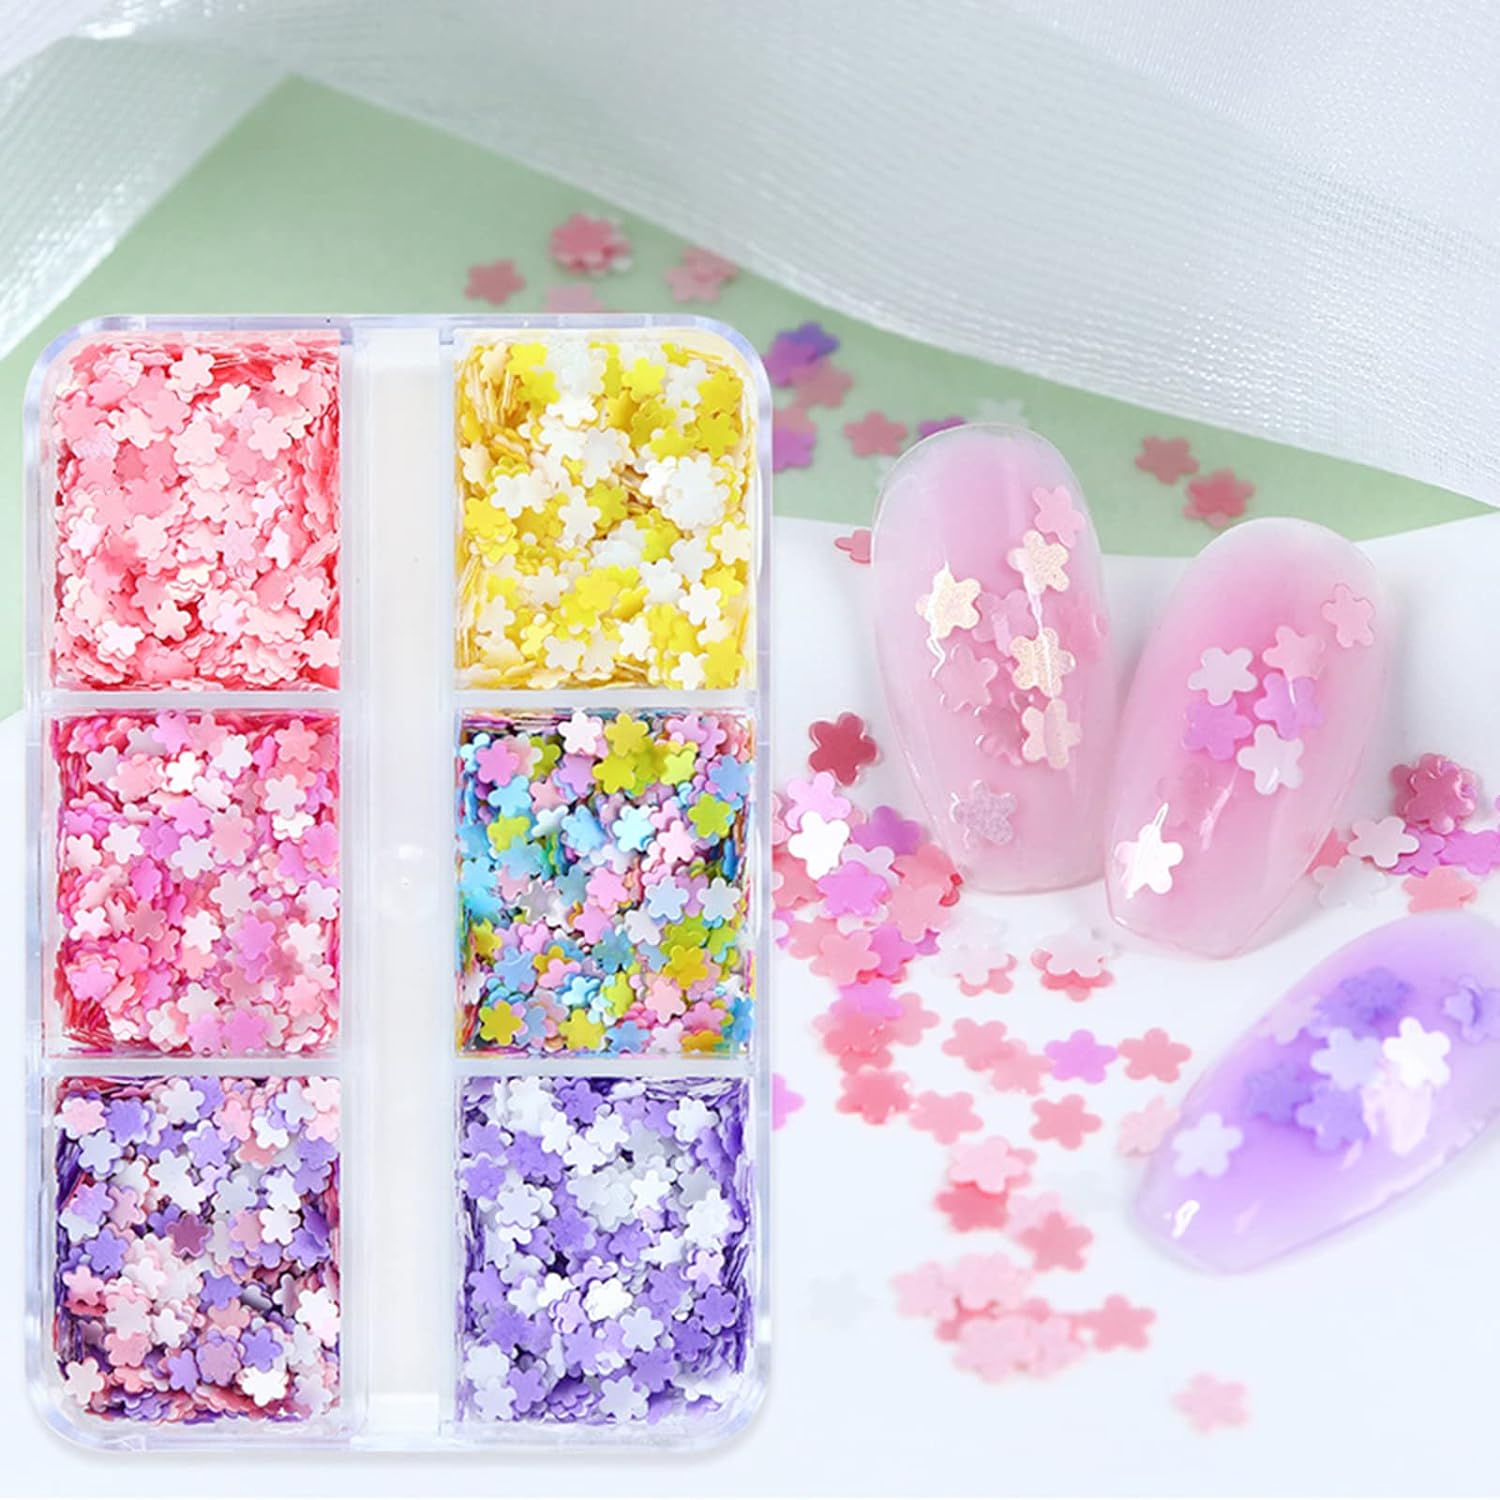 6 Grids of Sequins - #18 Pastel Flowers